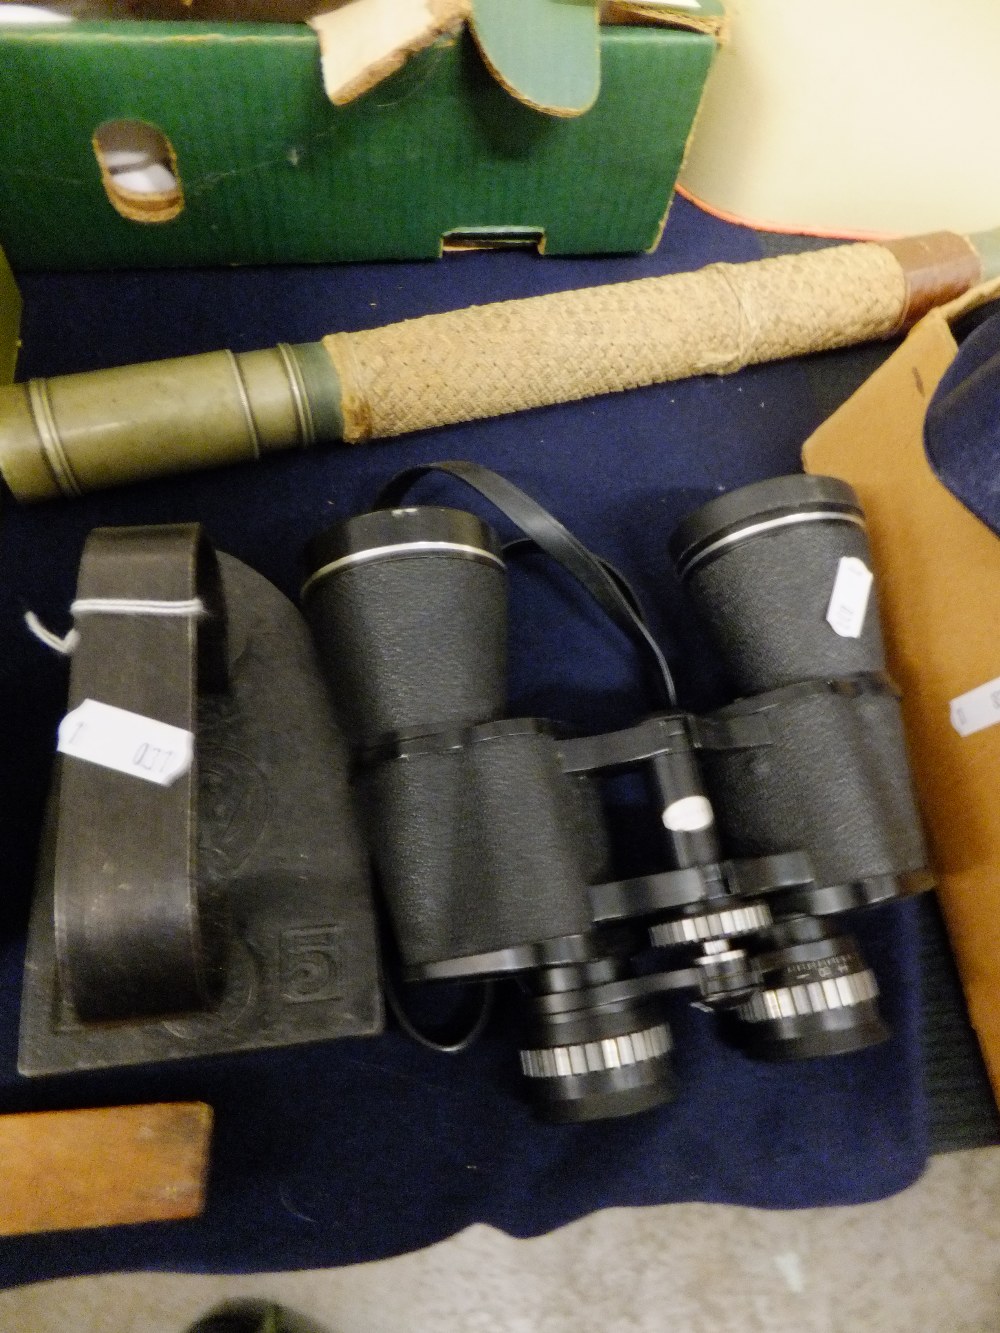 A pair of binoculars, a telescope and an iron paperweight